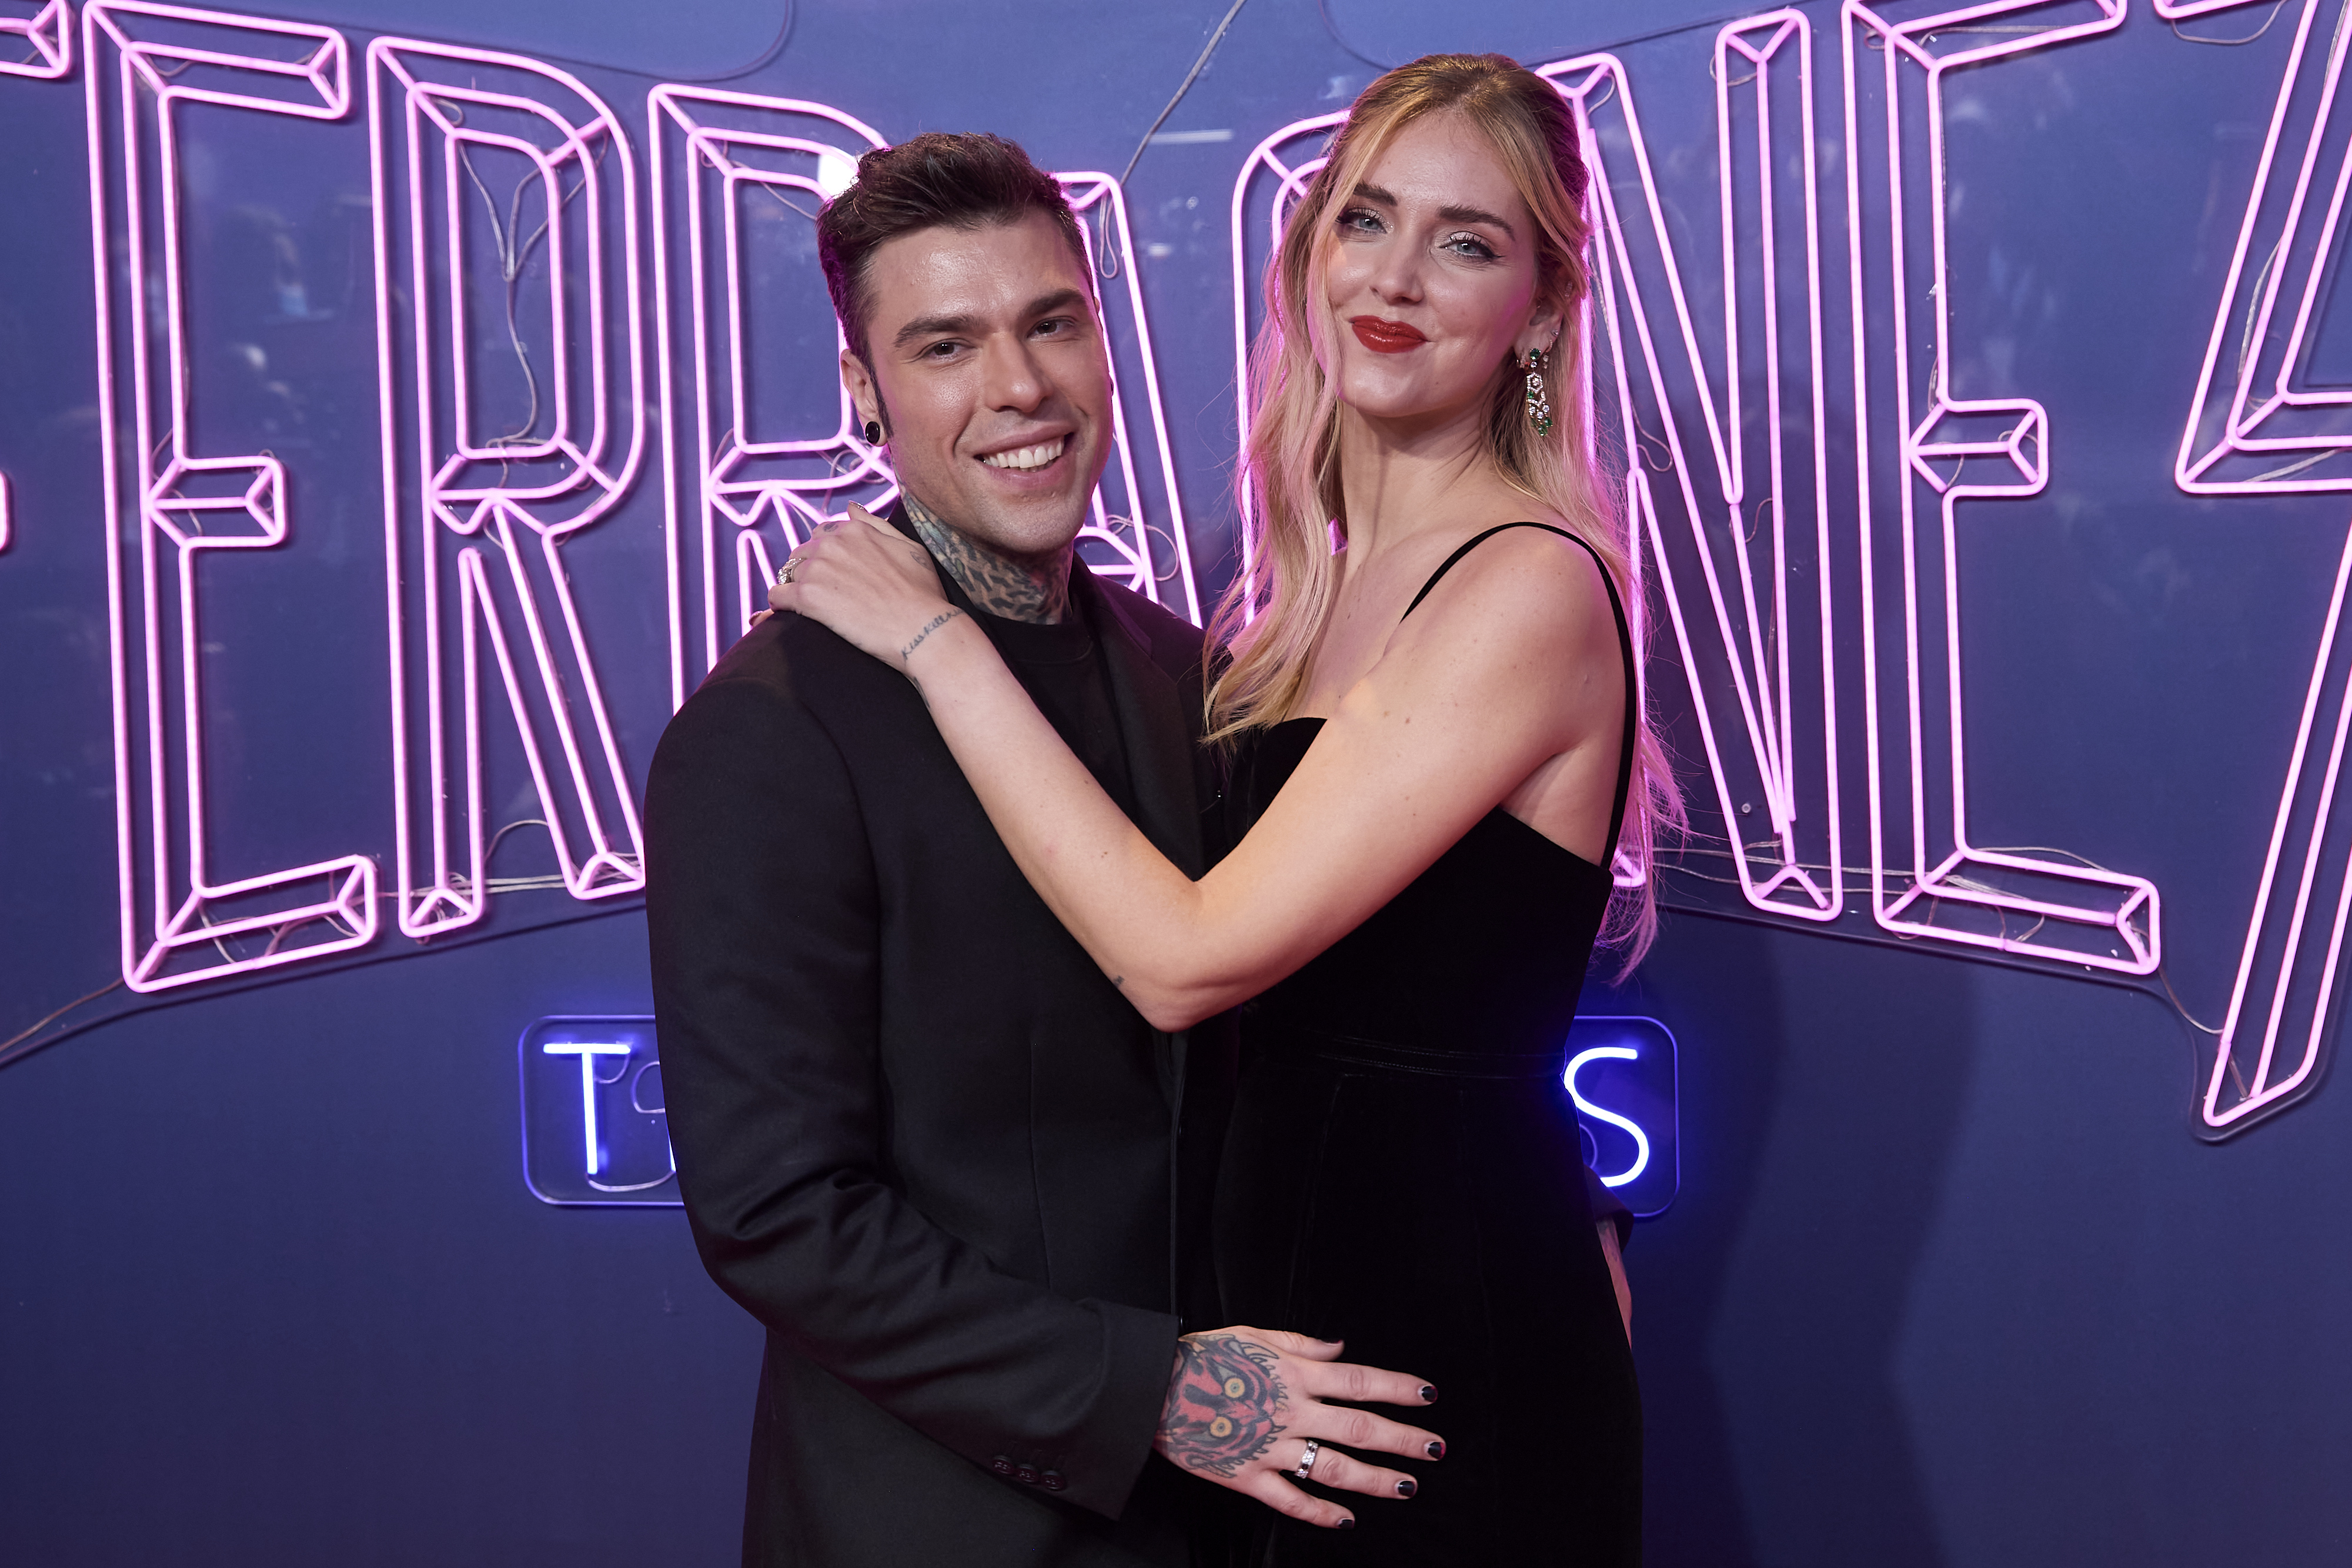 Fedez and Chiara Ferragni  at the premiere of "The Ferragnez" on November 29, 2021, in Madrid, Spain. | Source: Getty Images